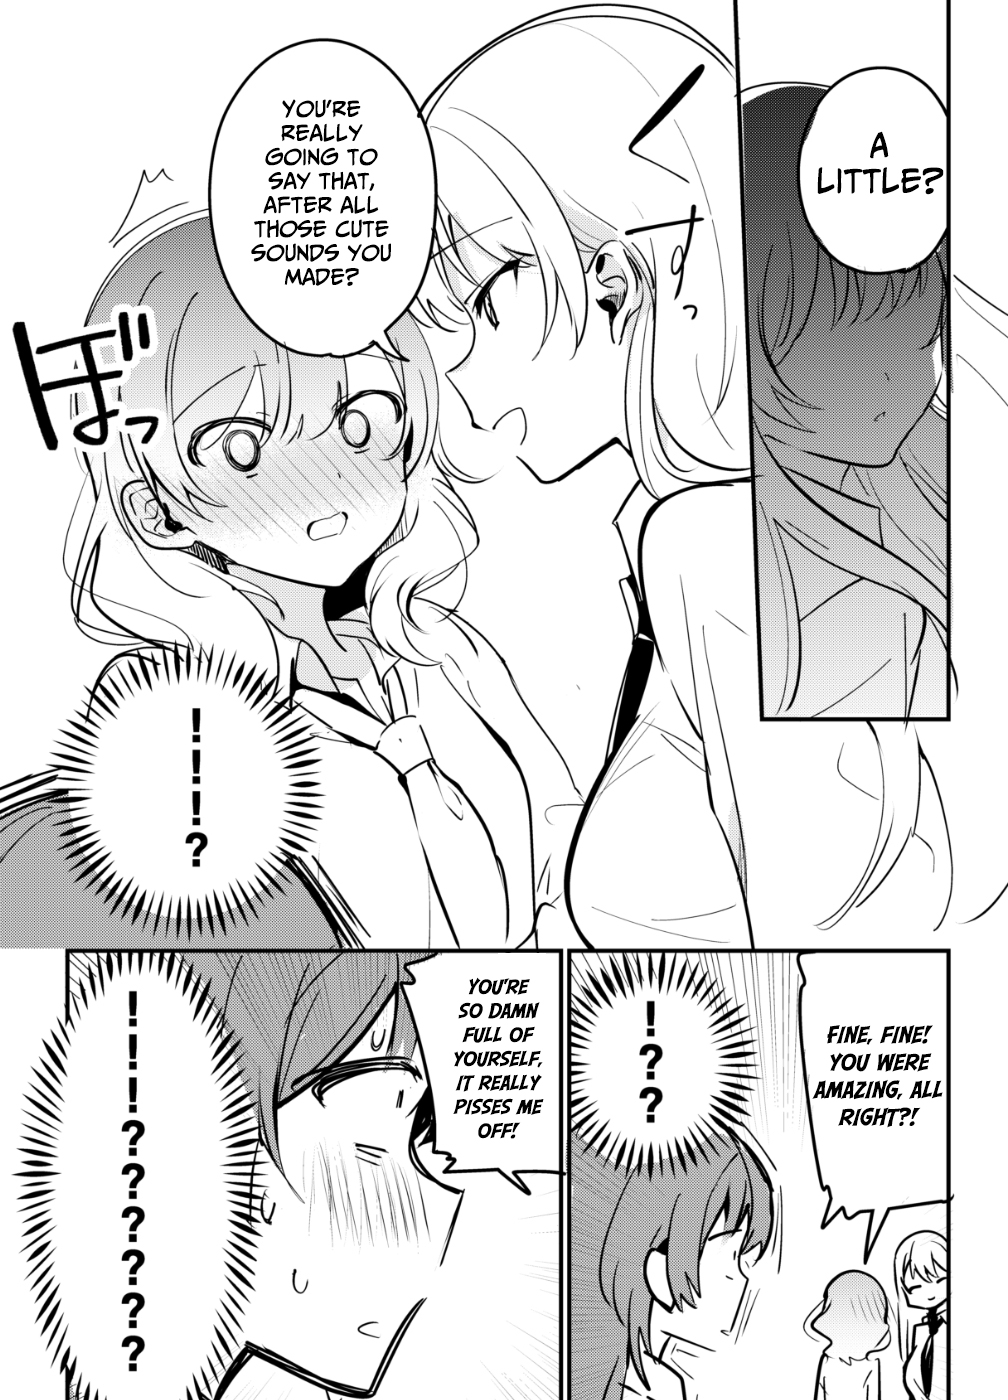 A Girl Whose Breasts are a Little Big and is Kinda Pretty Ch. 2 ！！！！？？？？？？